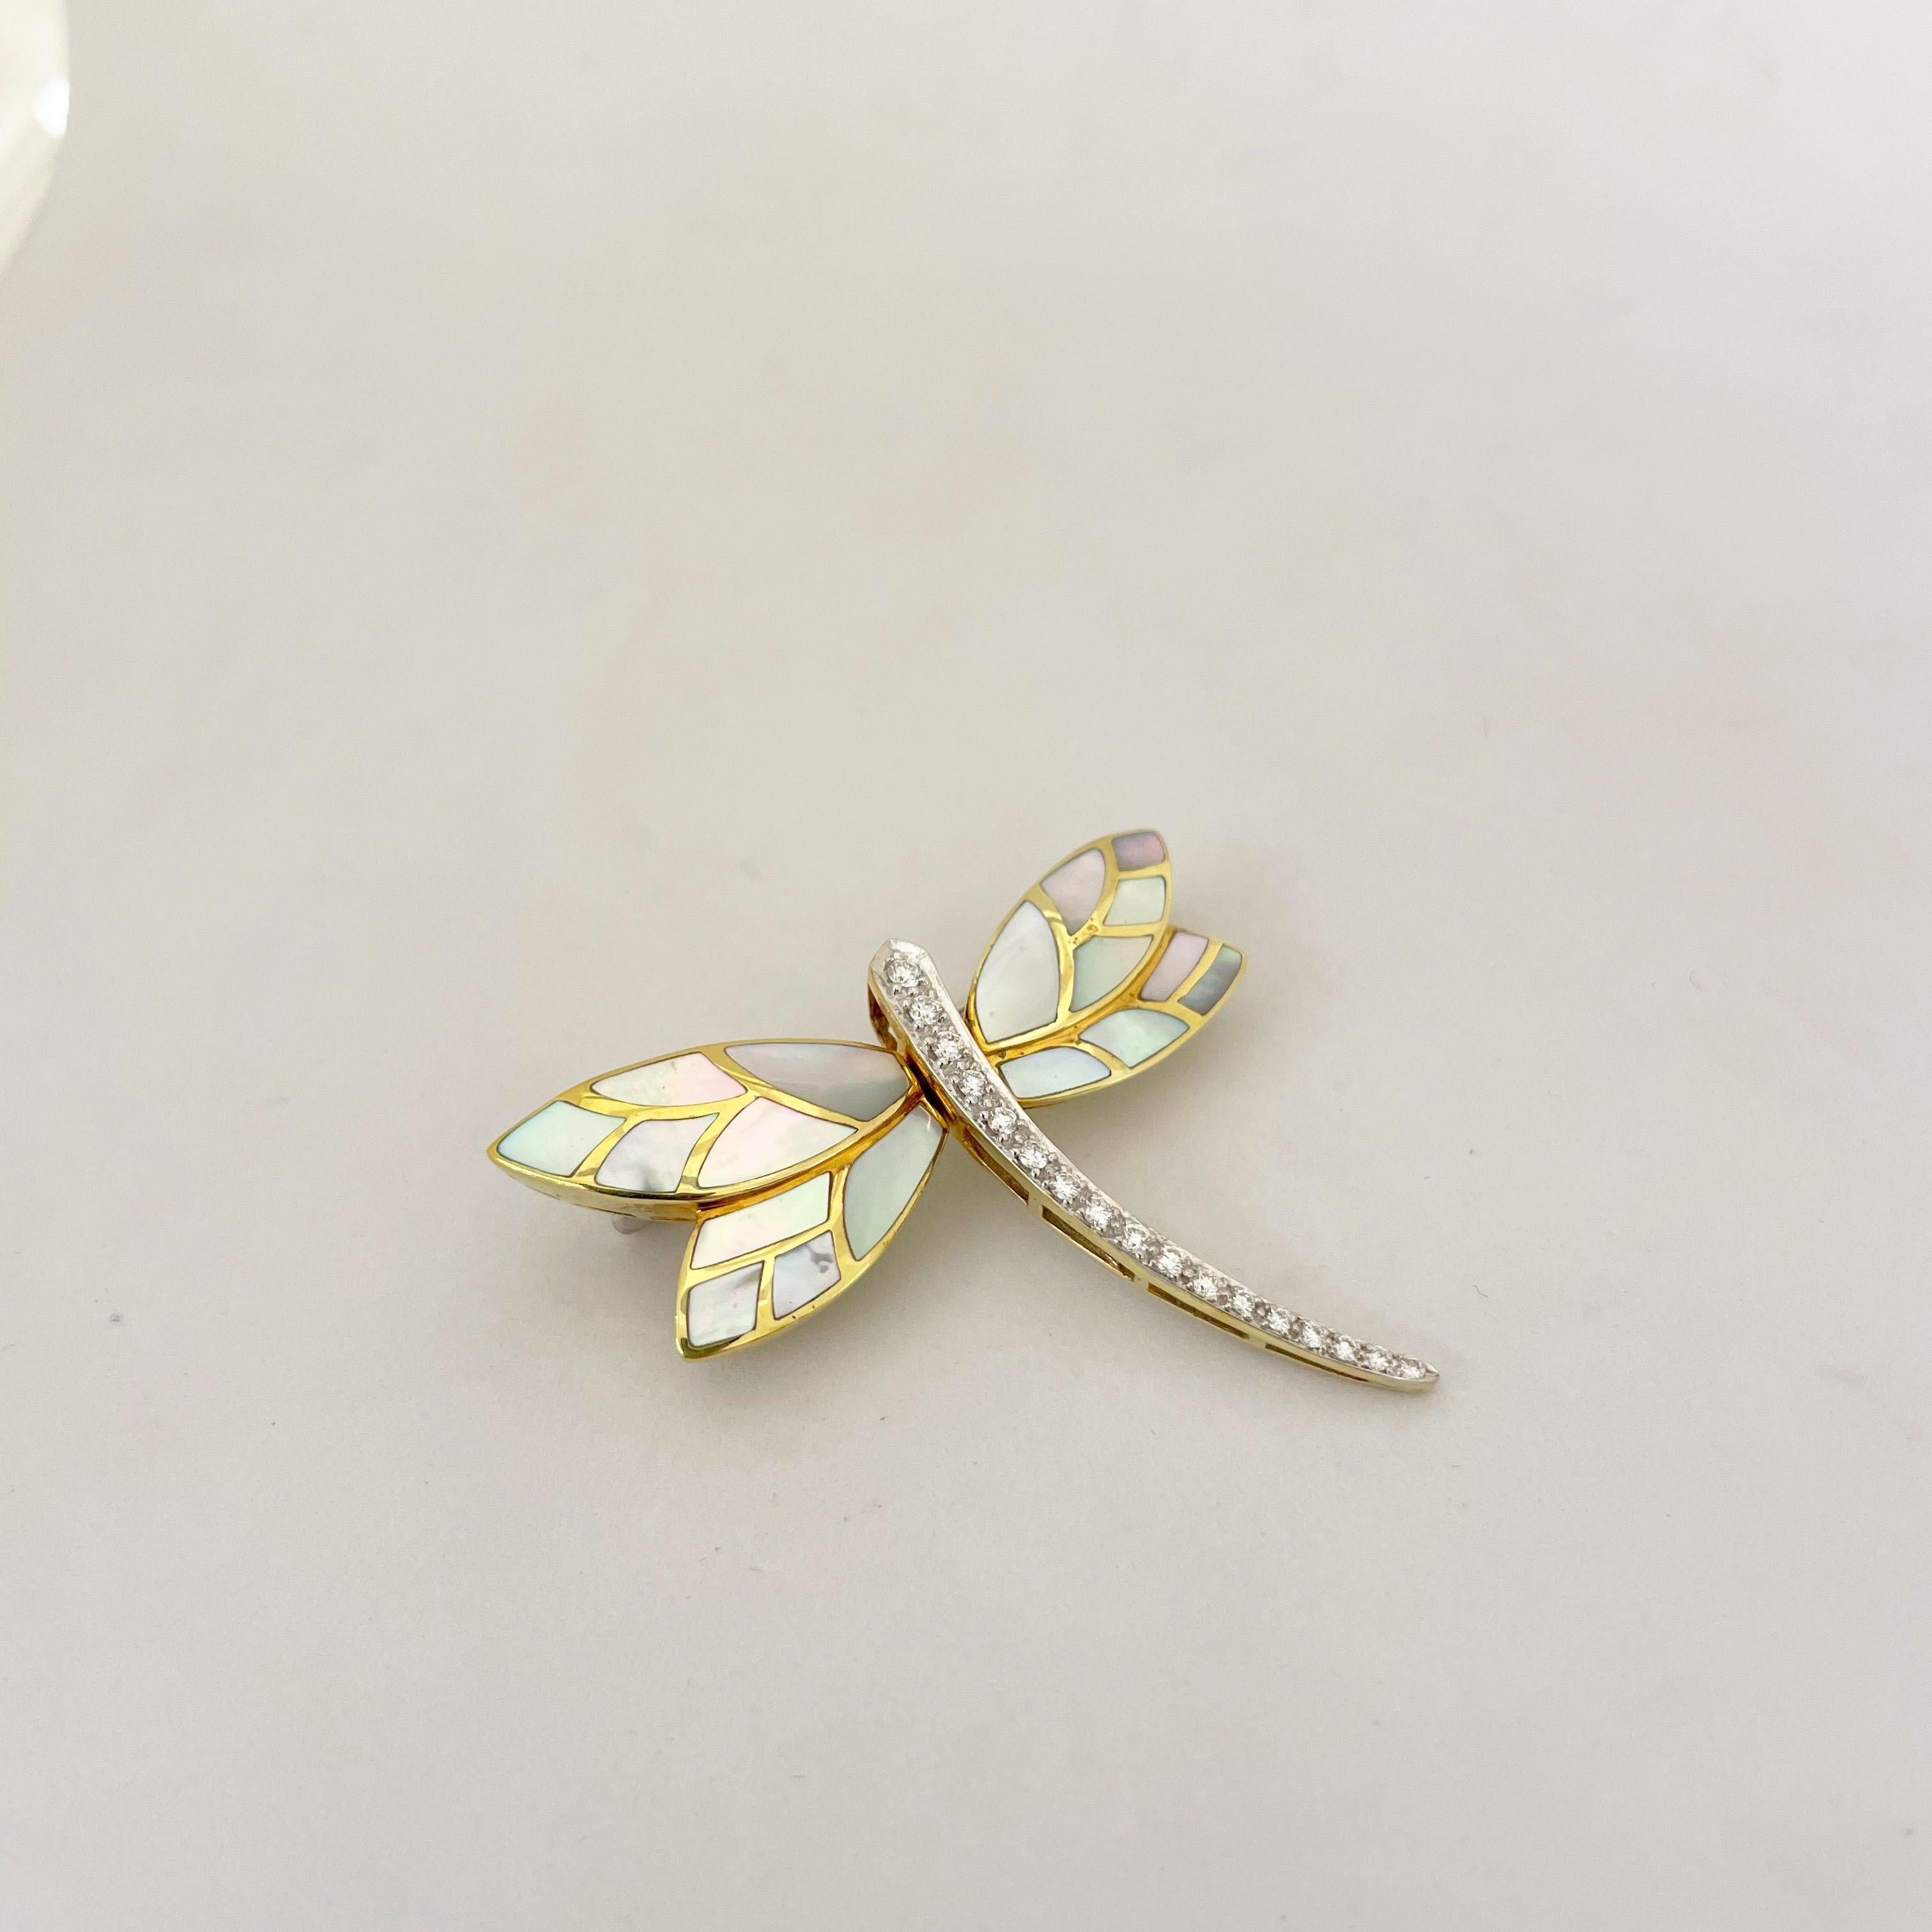 Designed by Asch Grossbardt , this 18 karat yellow gold brooch is intricately set with mother of pearl and round brilliant diamonds. The brooch measures 2